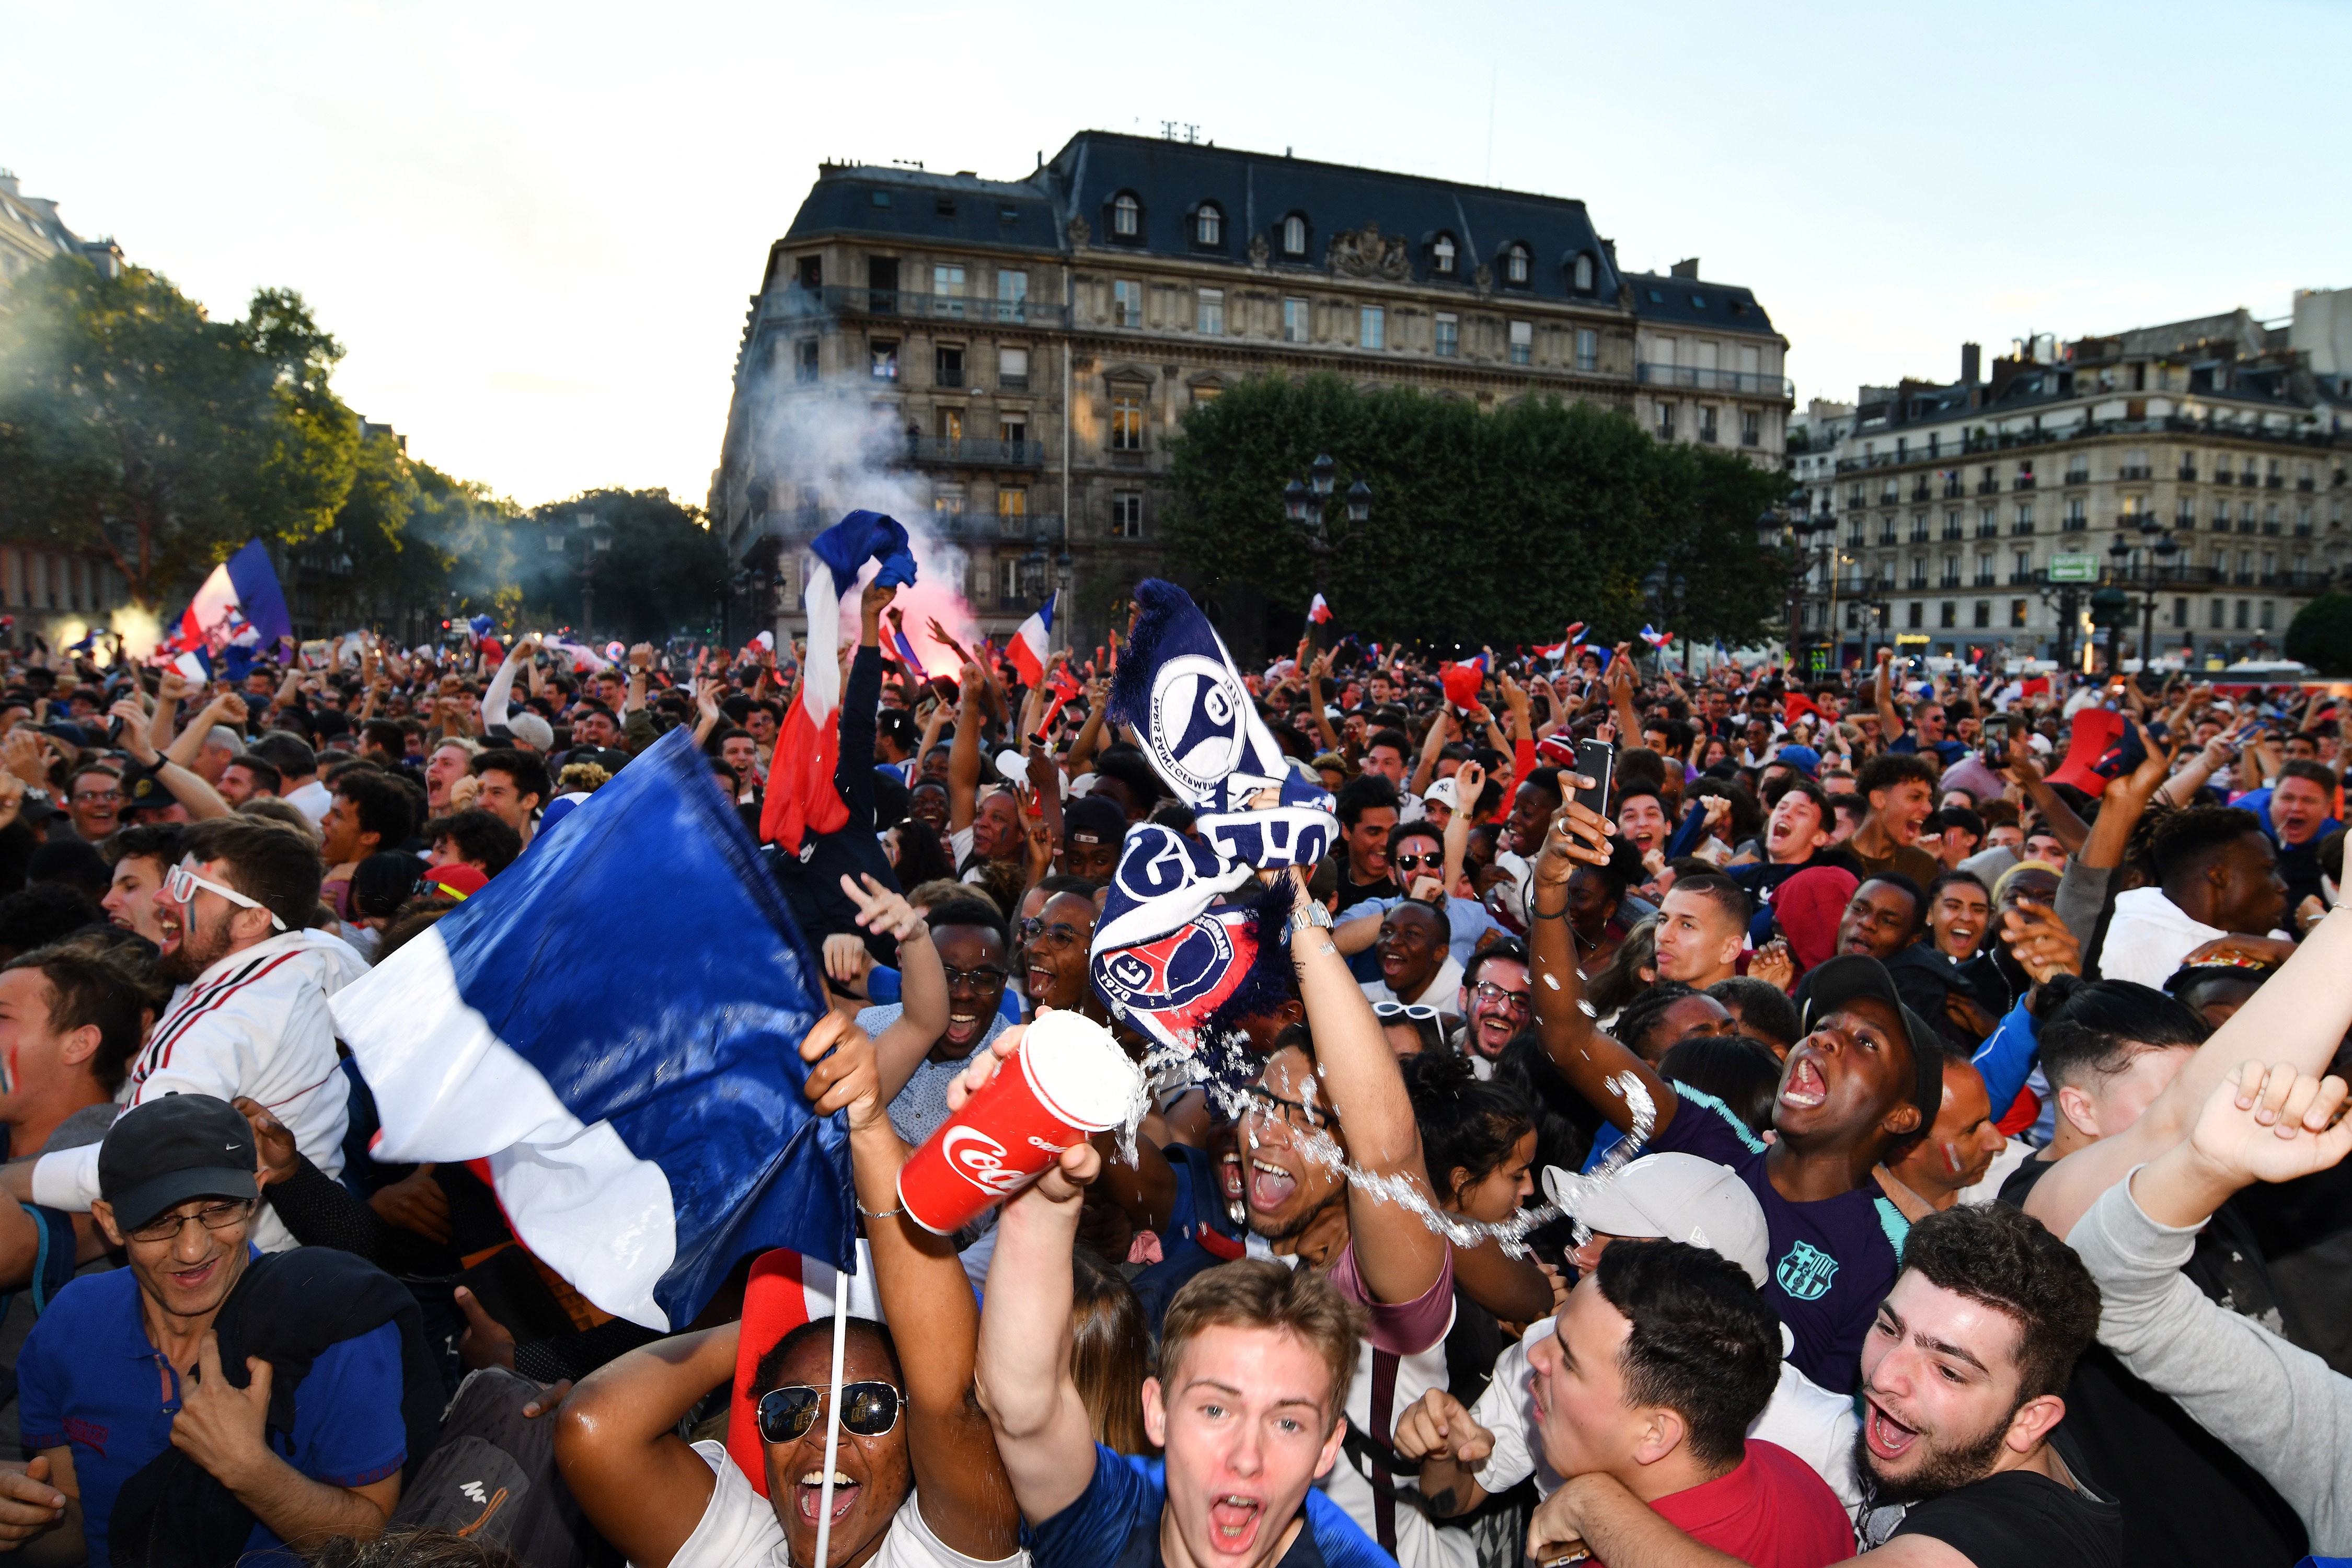 PARIS, FRANCE - JULY 10: Supporters of France football national team celebrate their team's victory against Belgium of the semifinal match in the FIFA 2018 World Cup in front of the Hotel de Ville in Paris, France on July 10, 2018. (Photo by Mustafa Yalcin/Anadolu Agency/Getty Images)